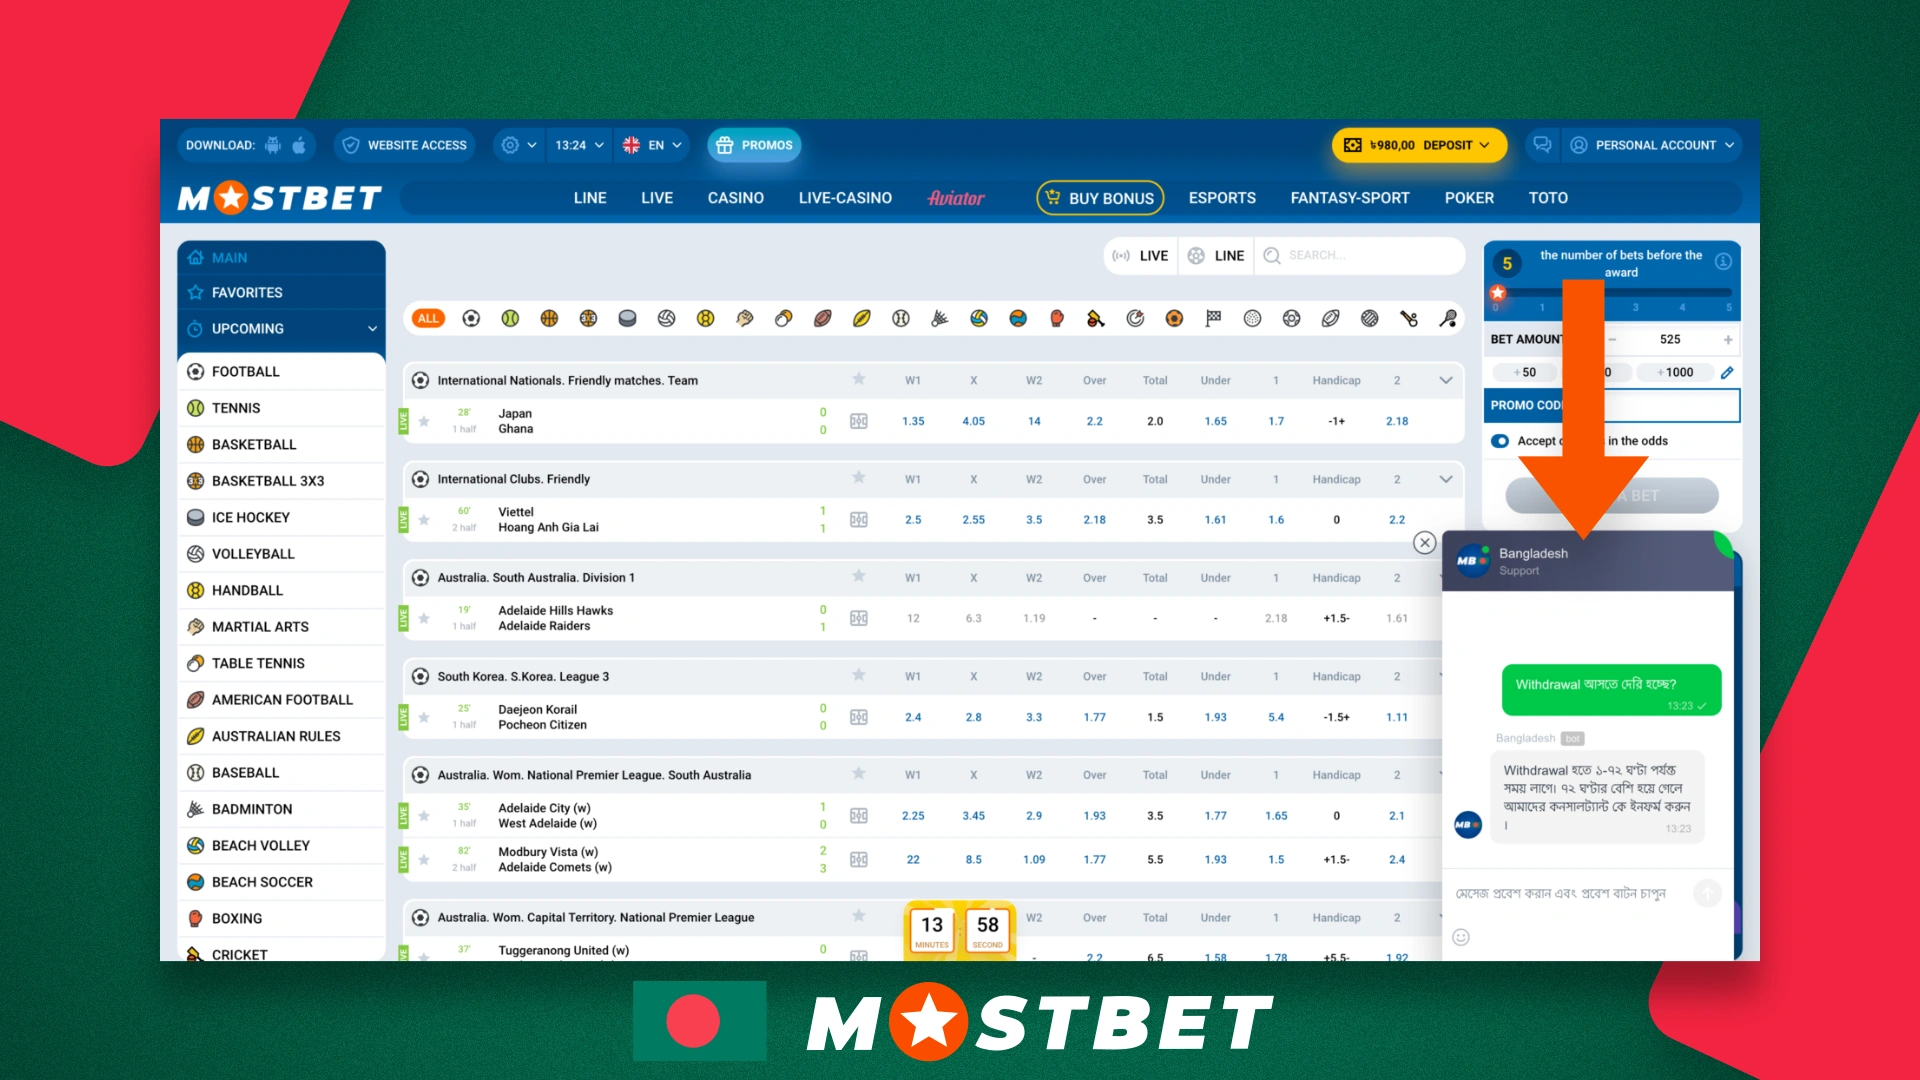 Online chat with Mostbet Bangladesh support team